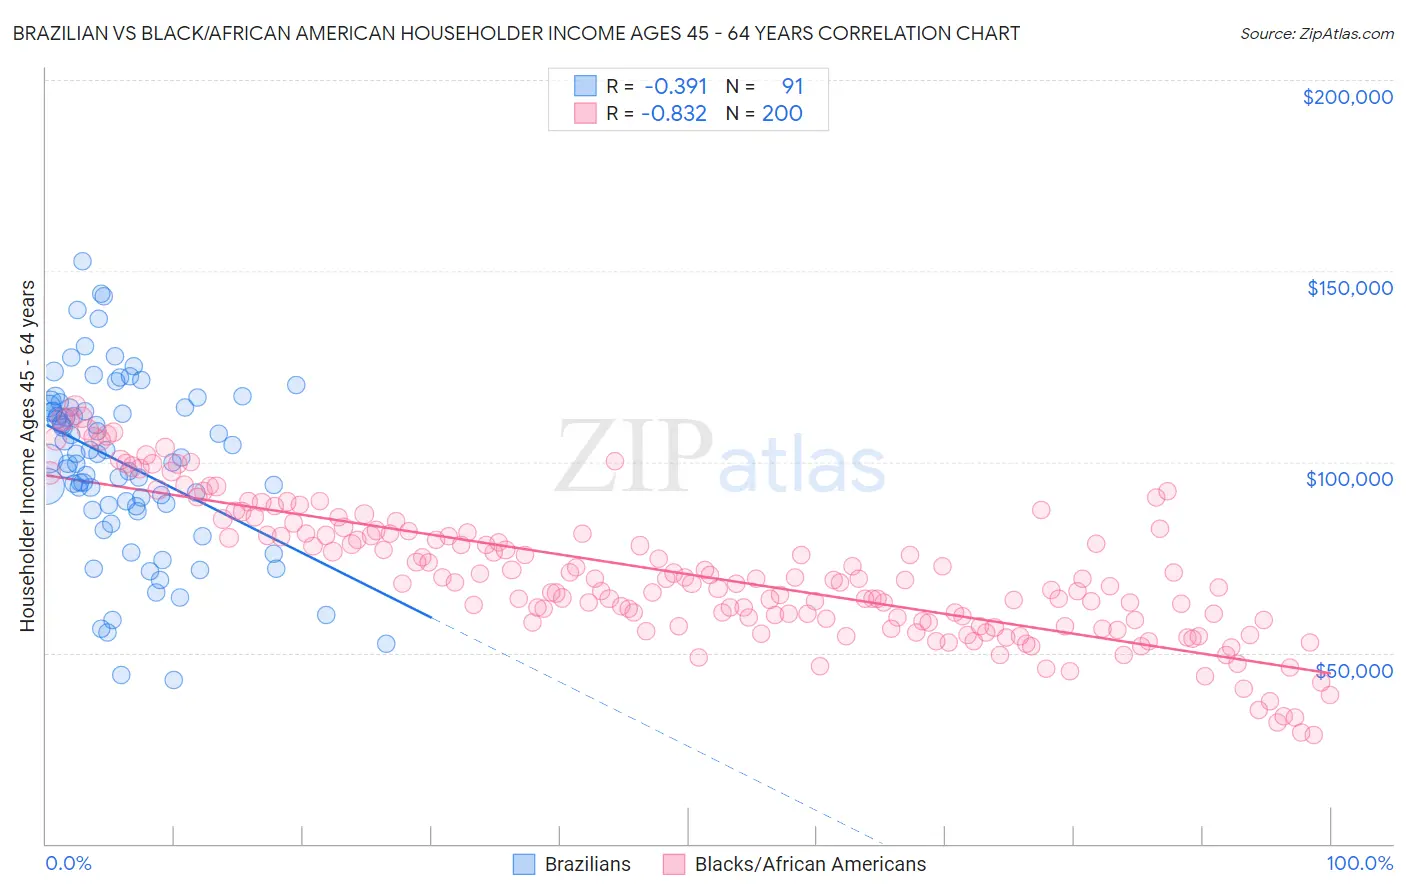 Brazilian vs Black/African American Householder Income Ages 45 - 64 years